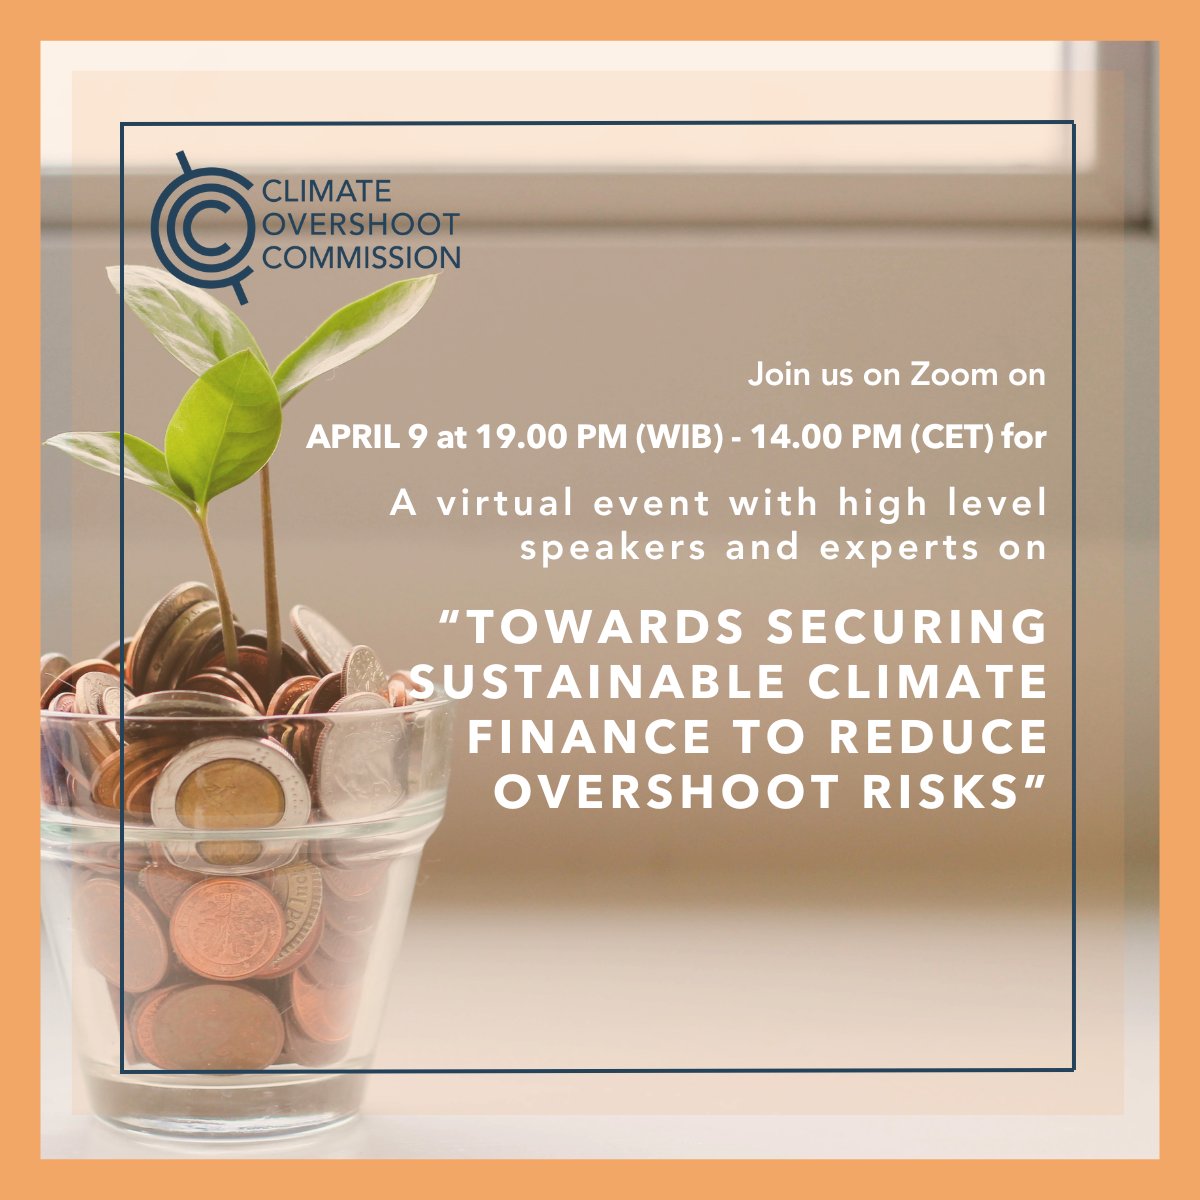 🌍 Save the Date! Join Commissioner @ChatibBasri for our virtual event on 'Towards securing sustainable climate finance to reduce overshoot risks'. 📅April 9th, 19:00 WIB / 14:00 CET on Zoom. 💻us06web.zoom.us/j/87898116243?…